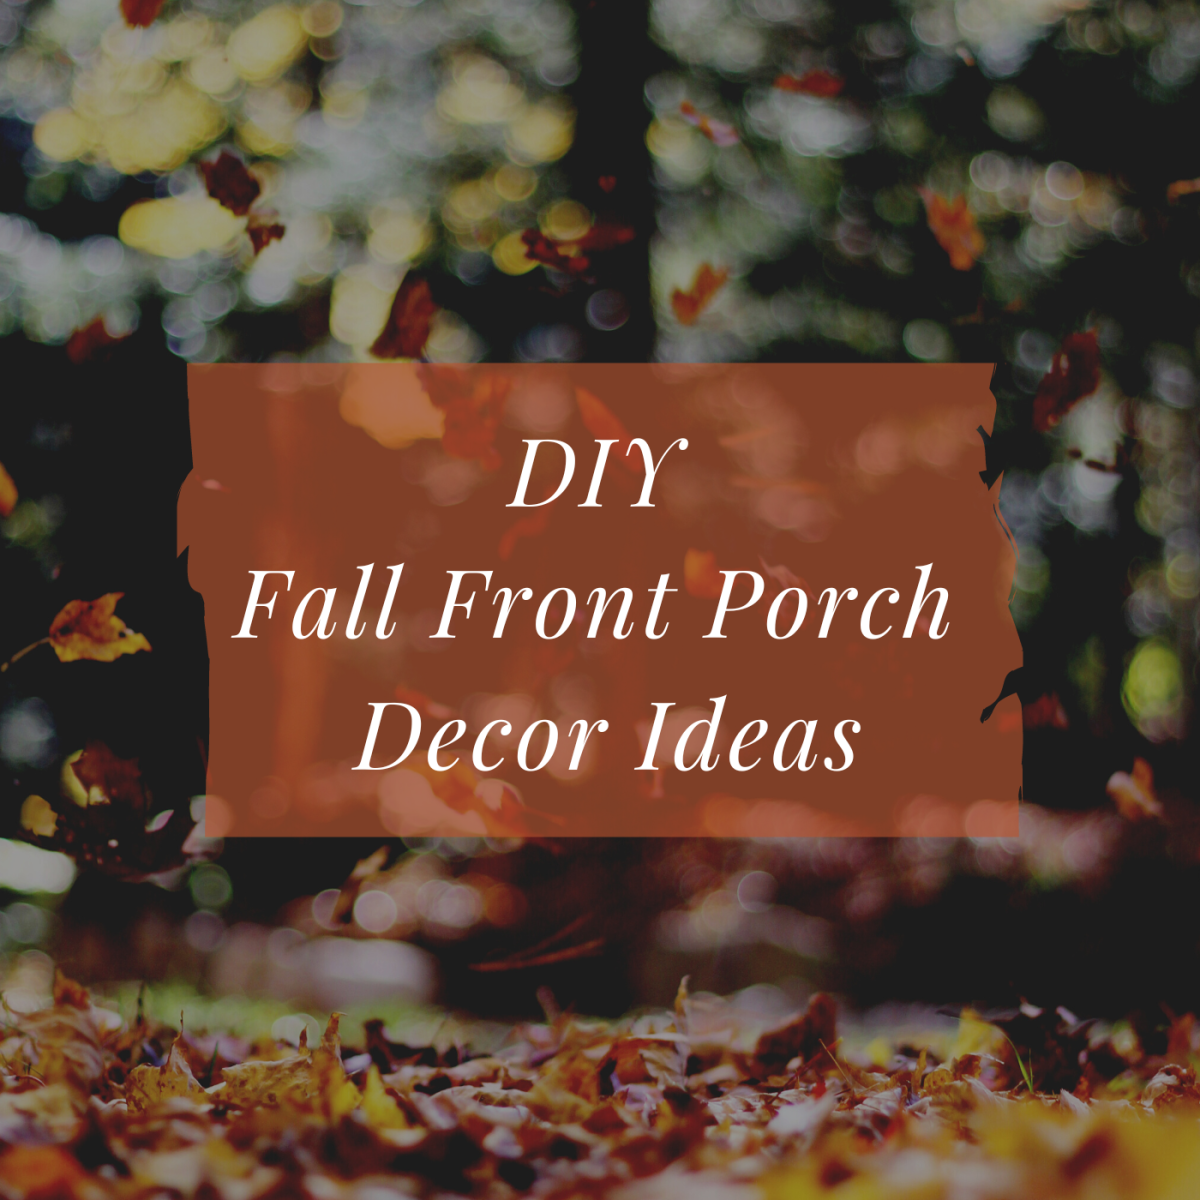 50+ Stunning DIY Fall Front Porch Decor Ideas to Bring a Cozy and Rustic Vibe to Your Outdoors